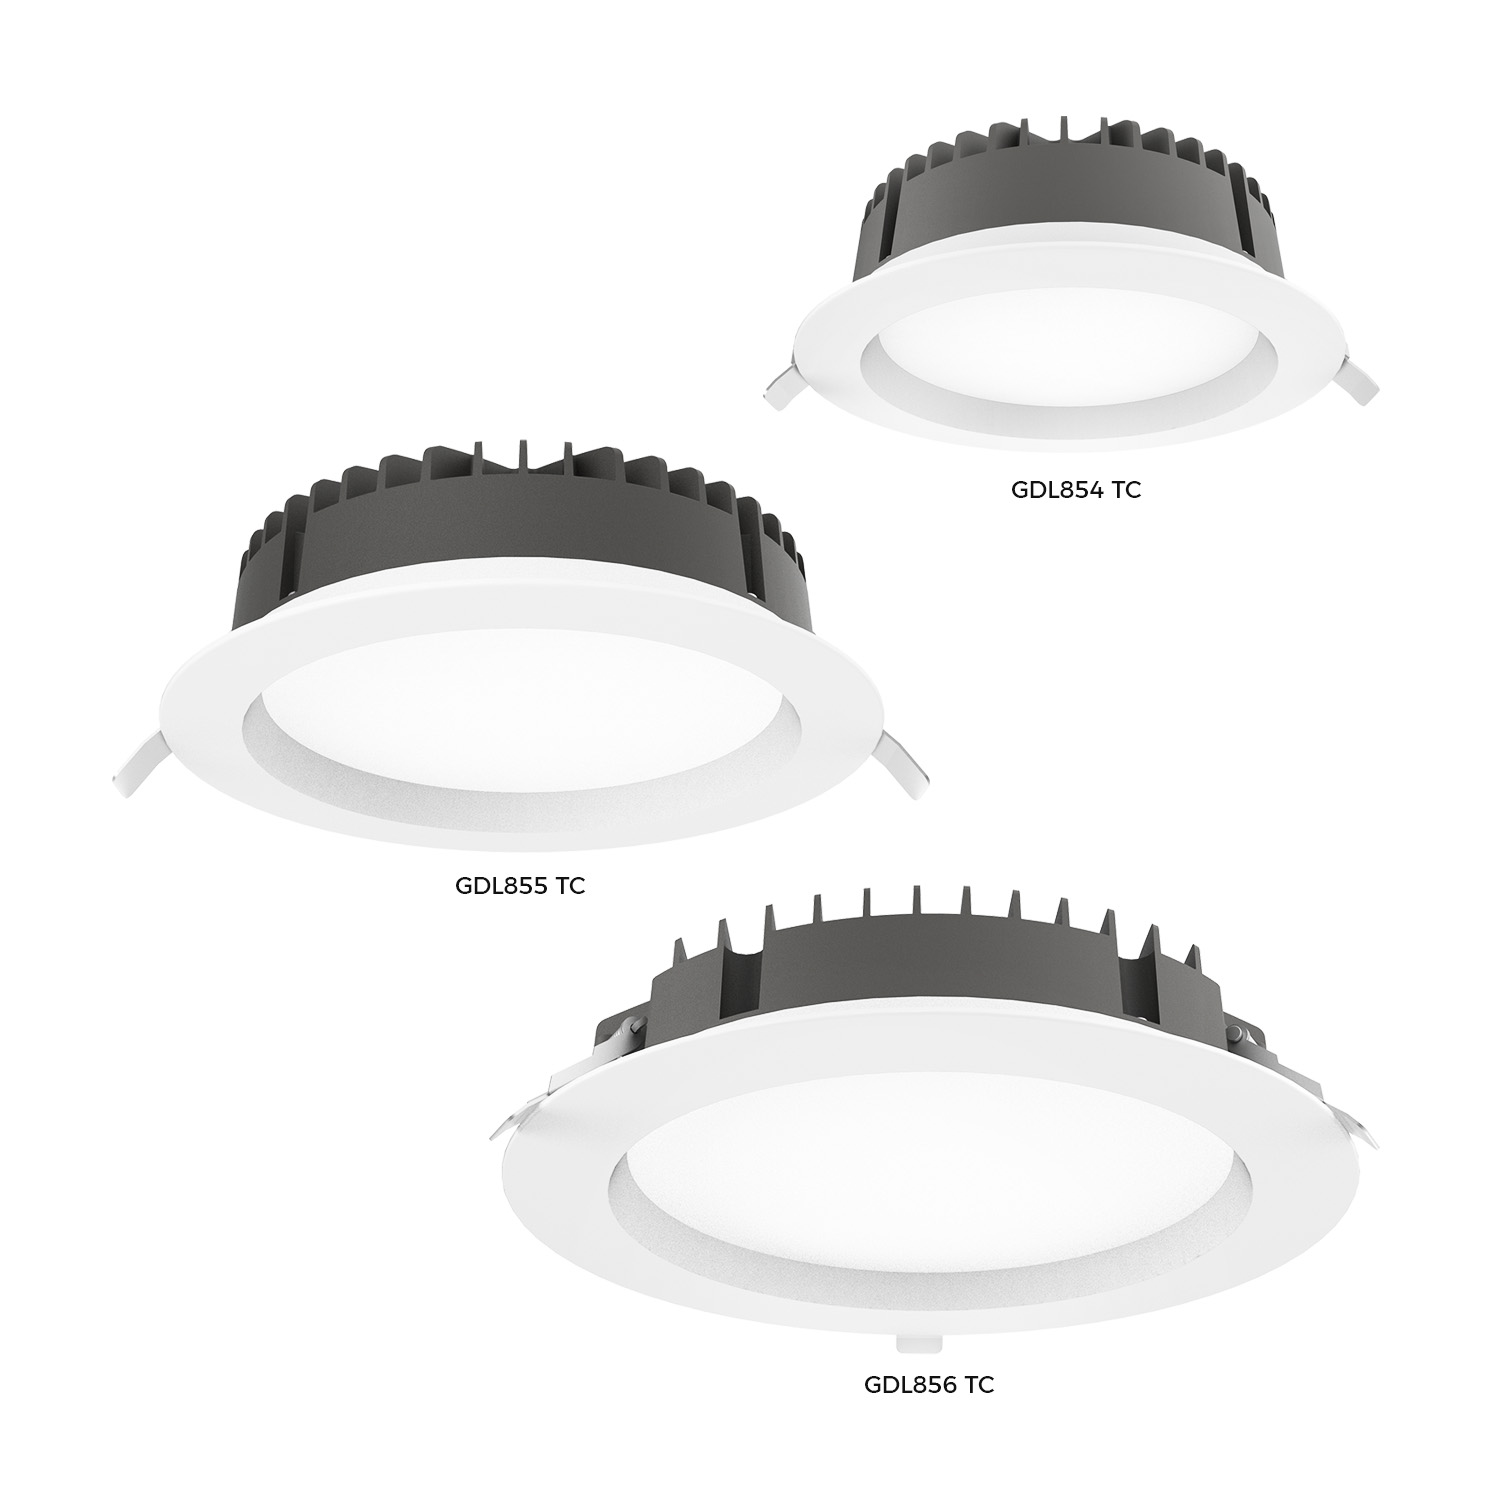 MERCURY LED DOWNLIGHT WHITE 14W/20W, 3000/4000/5700K, IP54, DIMMABLE